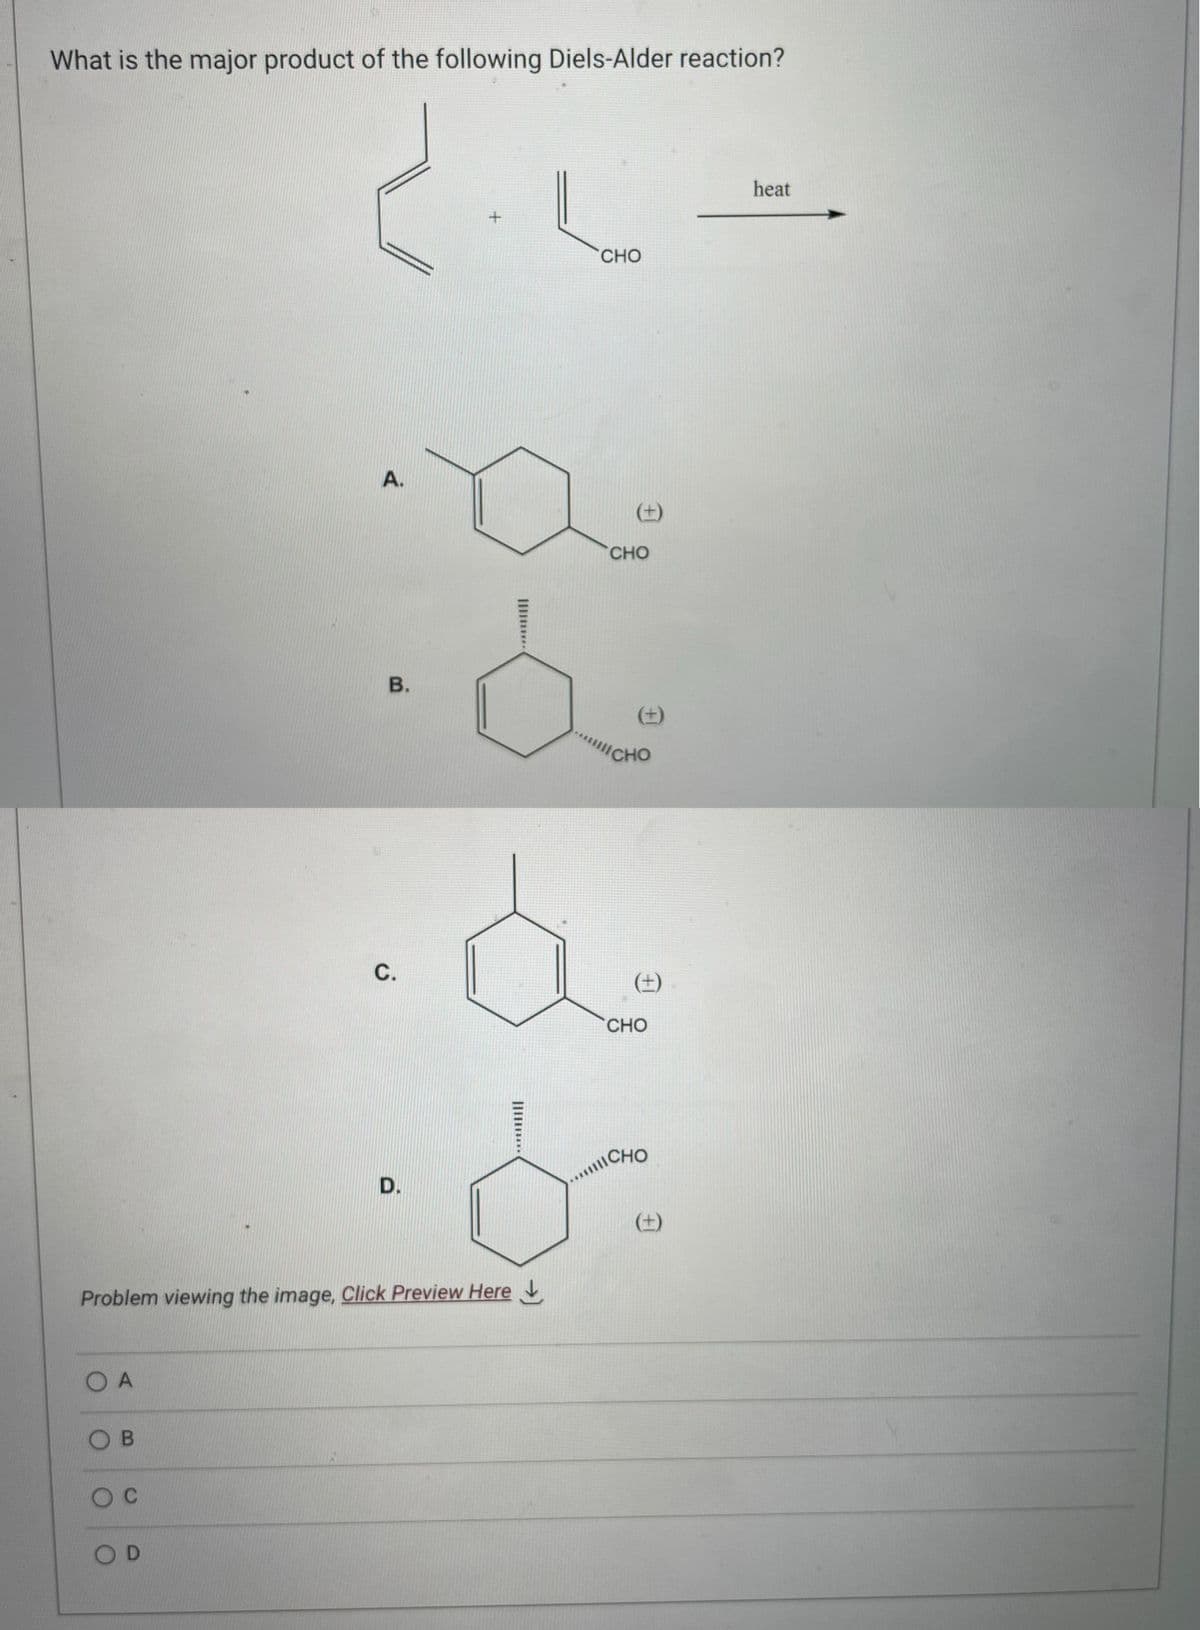 What is the major product of the following Diels-Alder reaction?
2.L
+
COA
OB
O C
A.
Problem viewing the image, Click Preview Here
OD
C.
D.
CHO
B.
·d
á
d
(+)
CHO
"ICHO
(±)
CHO
CHO
(+)
heat